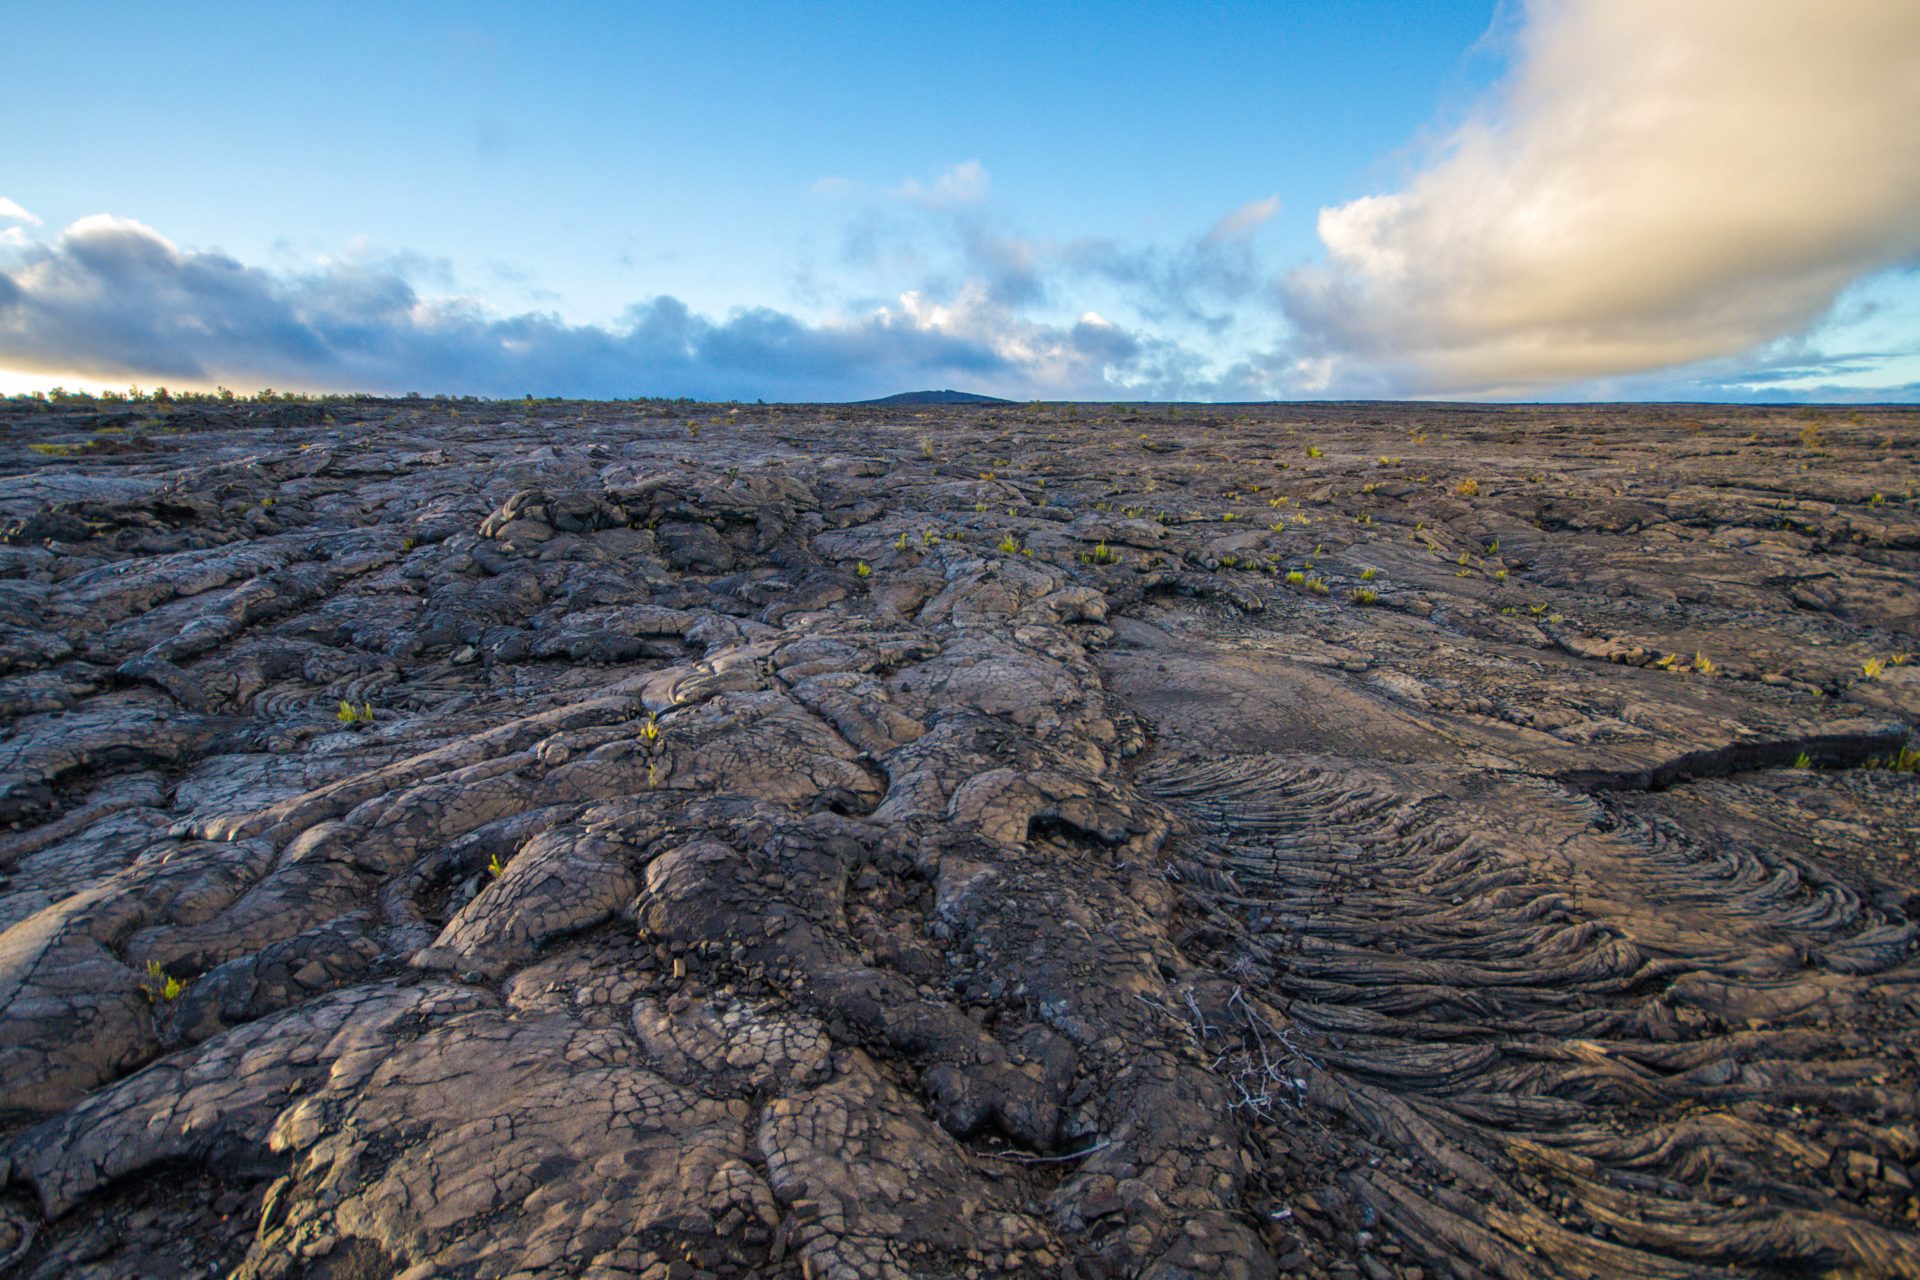 View of the East Rift Zone from the Chain of Craters Road in Hawaii Volcanoes National Park.